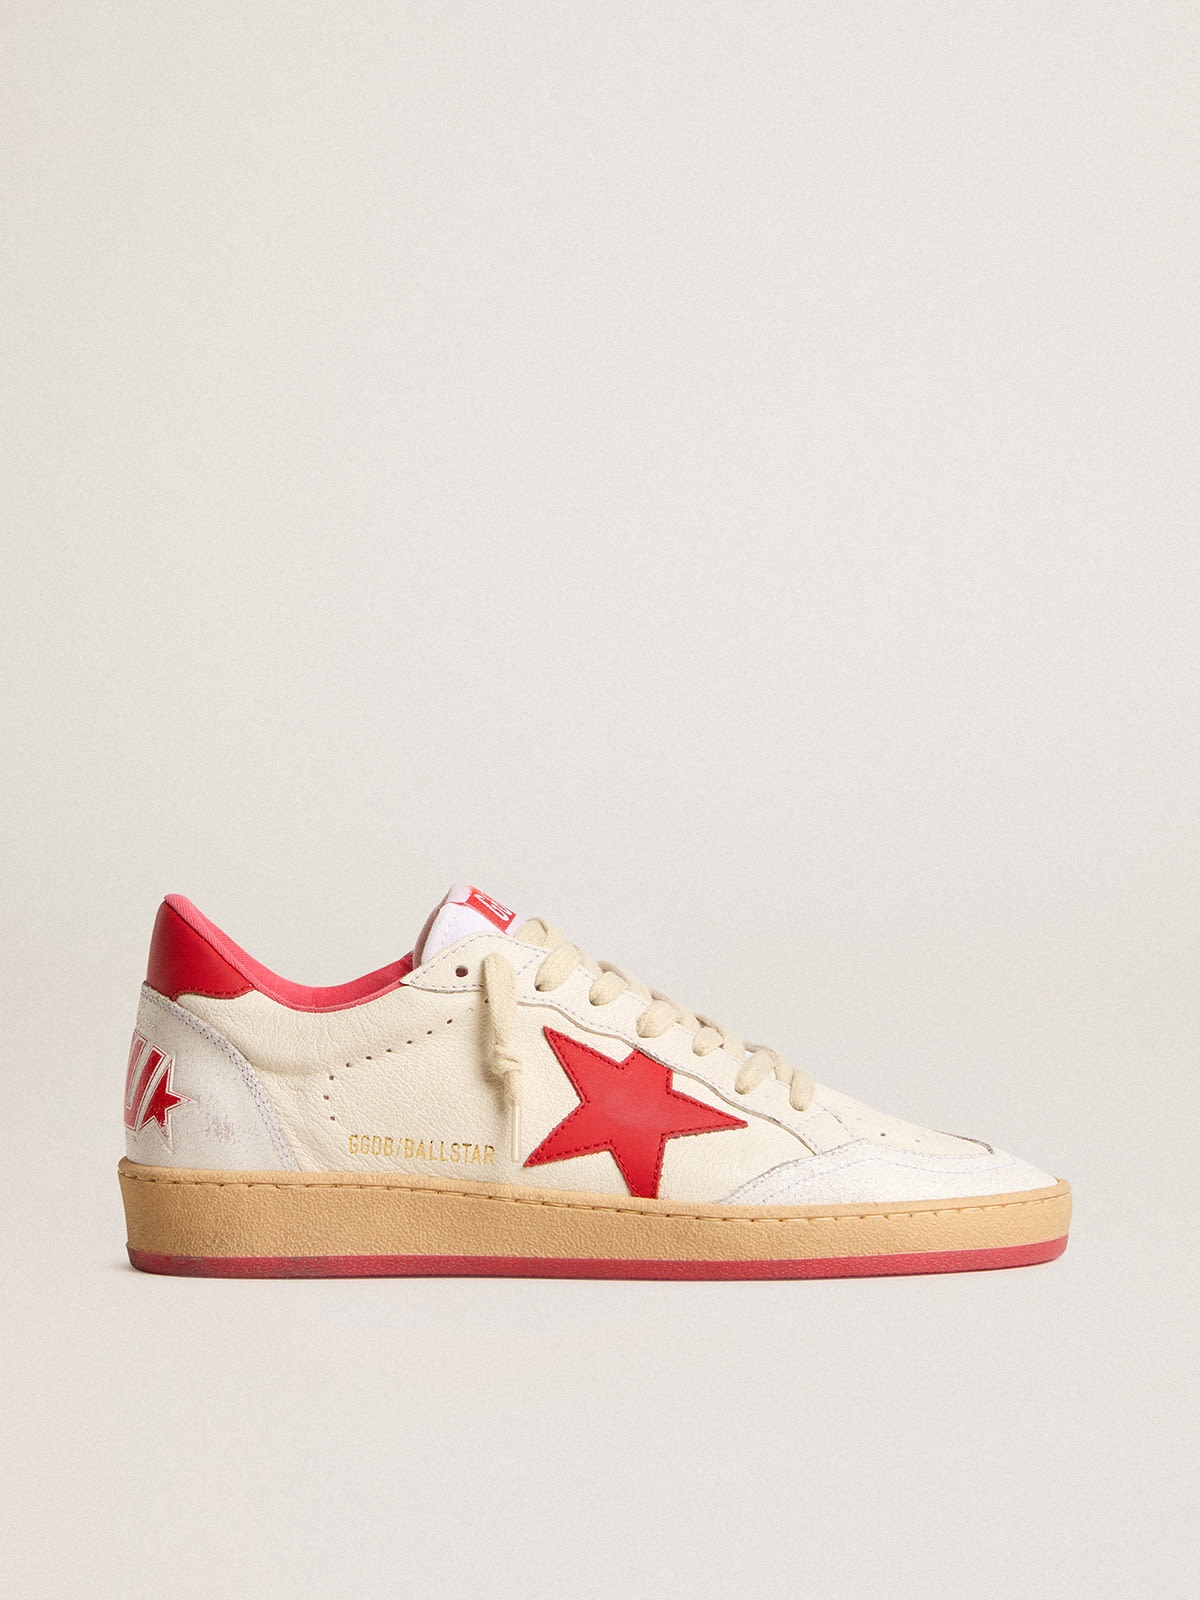 Golden Goose Men's Ball Star Wishes in white leather with a red star and  heel tab | REVERSIBLE